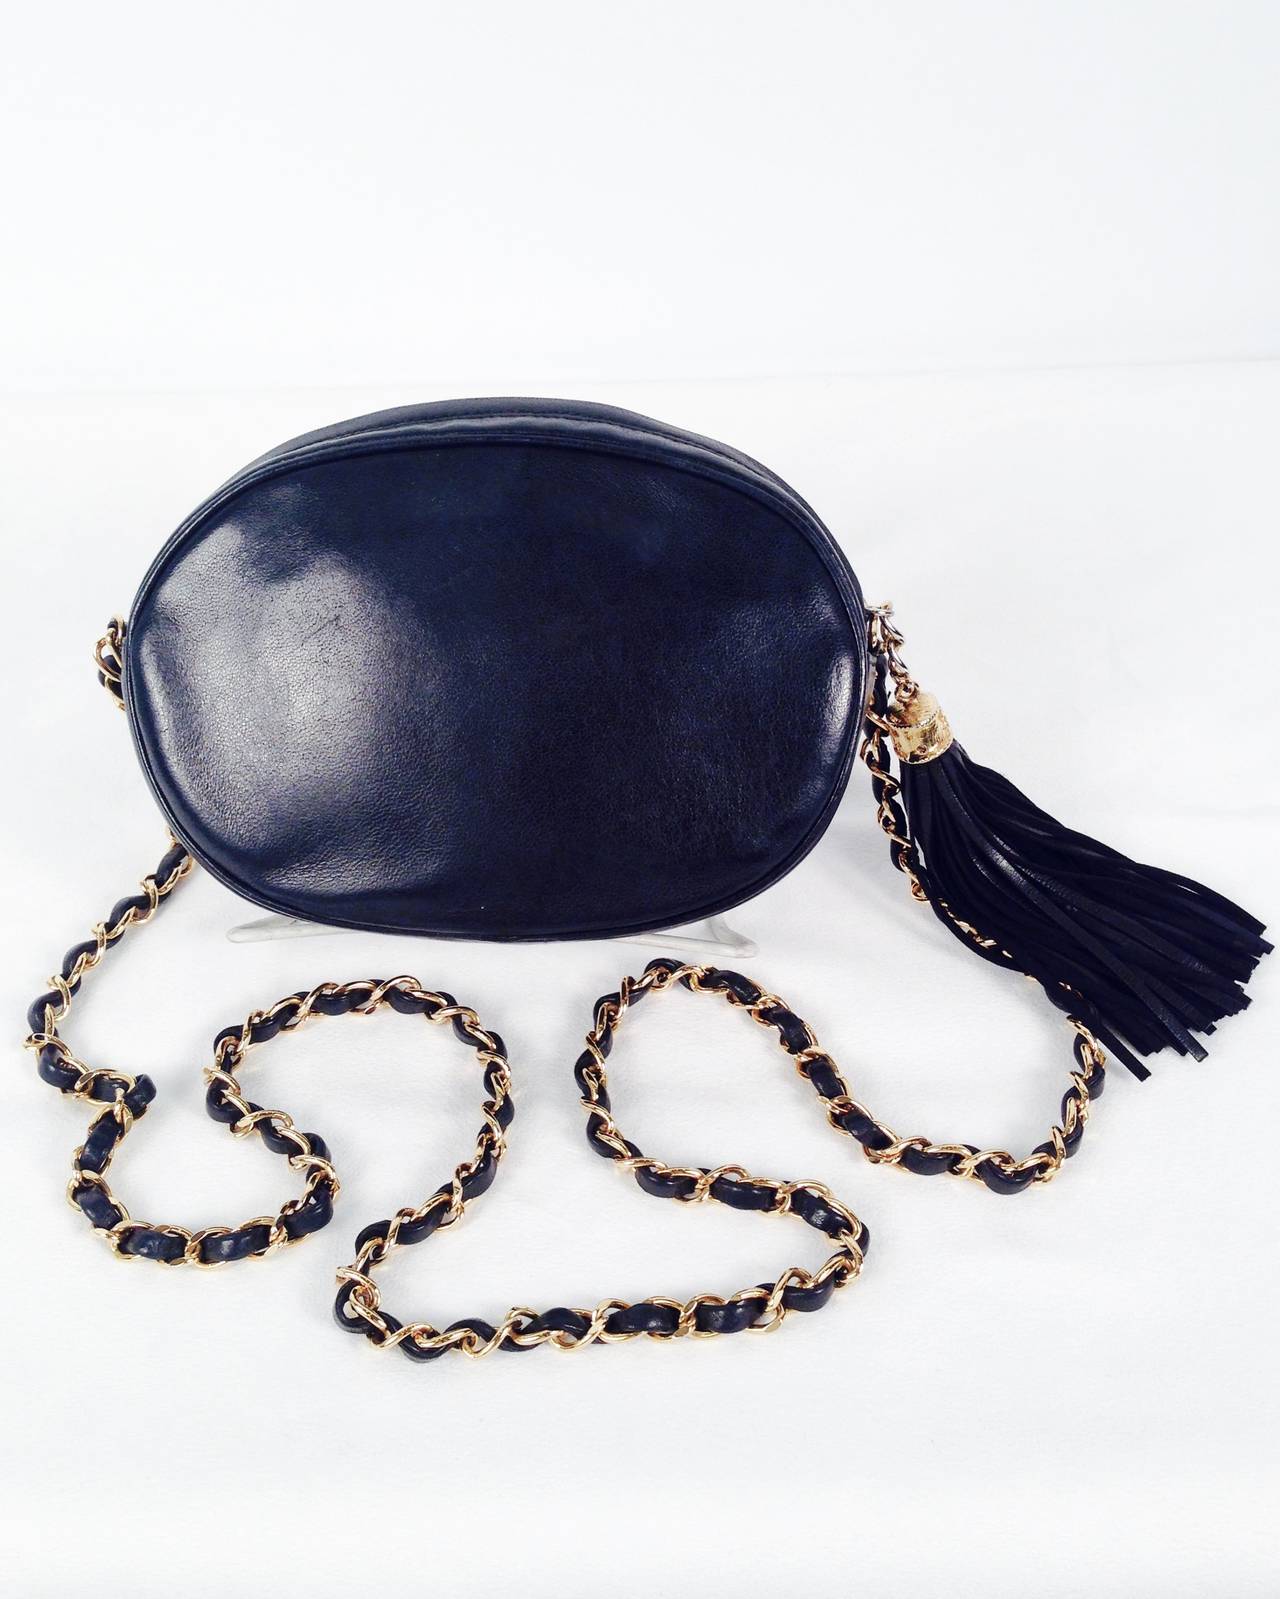 Live the fantasy with this vintage oval shoulder bag from Chanel!  Crafted between 1989 and 1991, bag features signature double 